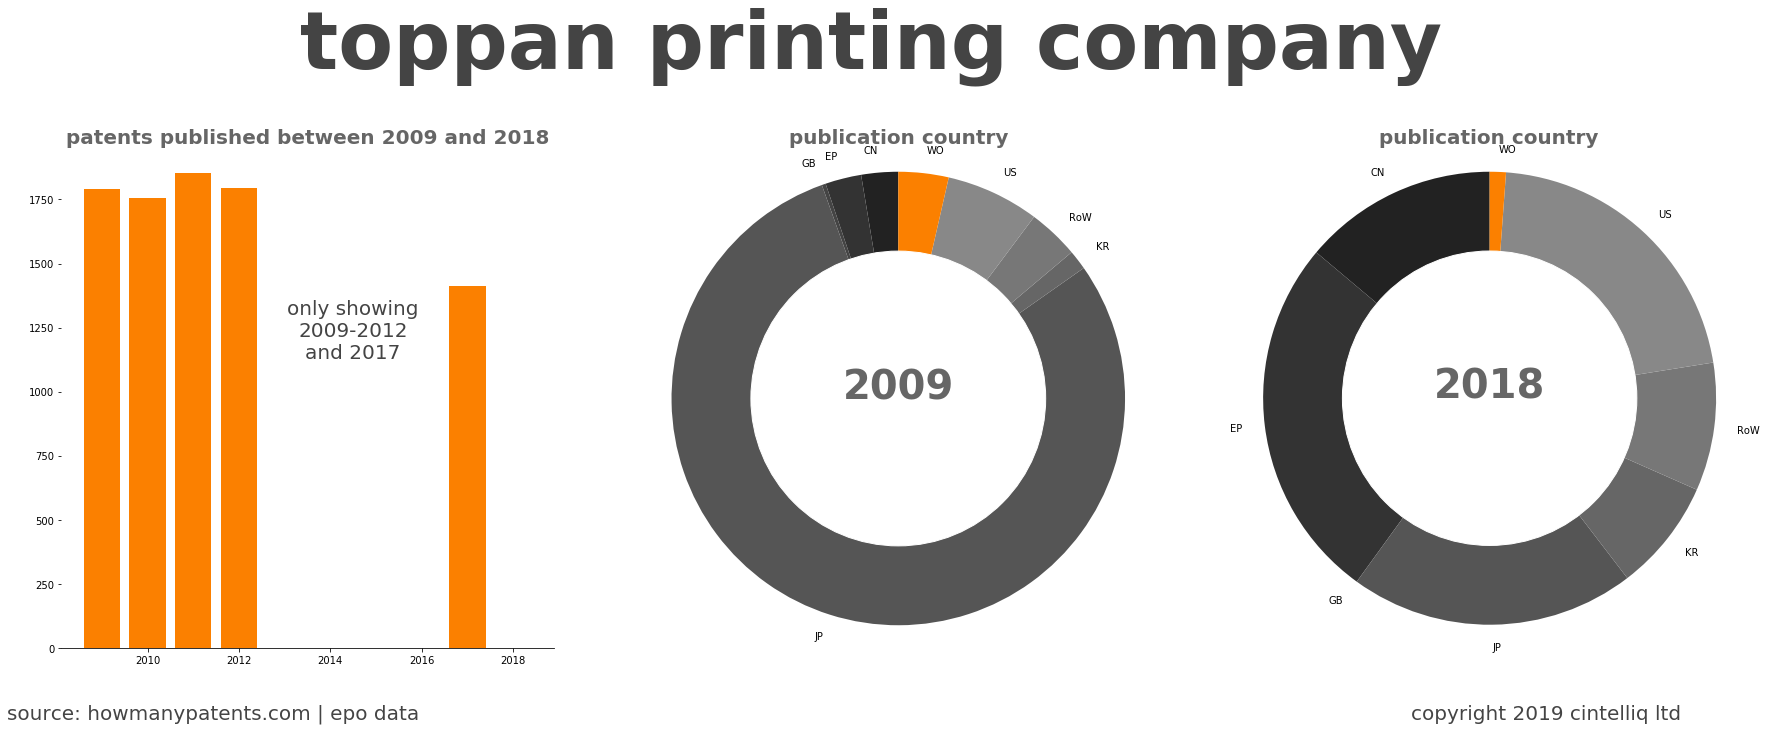 summary of patents for Toppan Printing Company